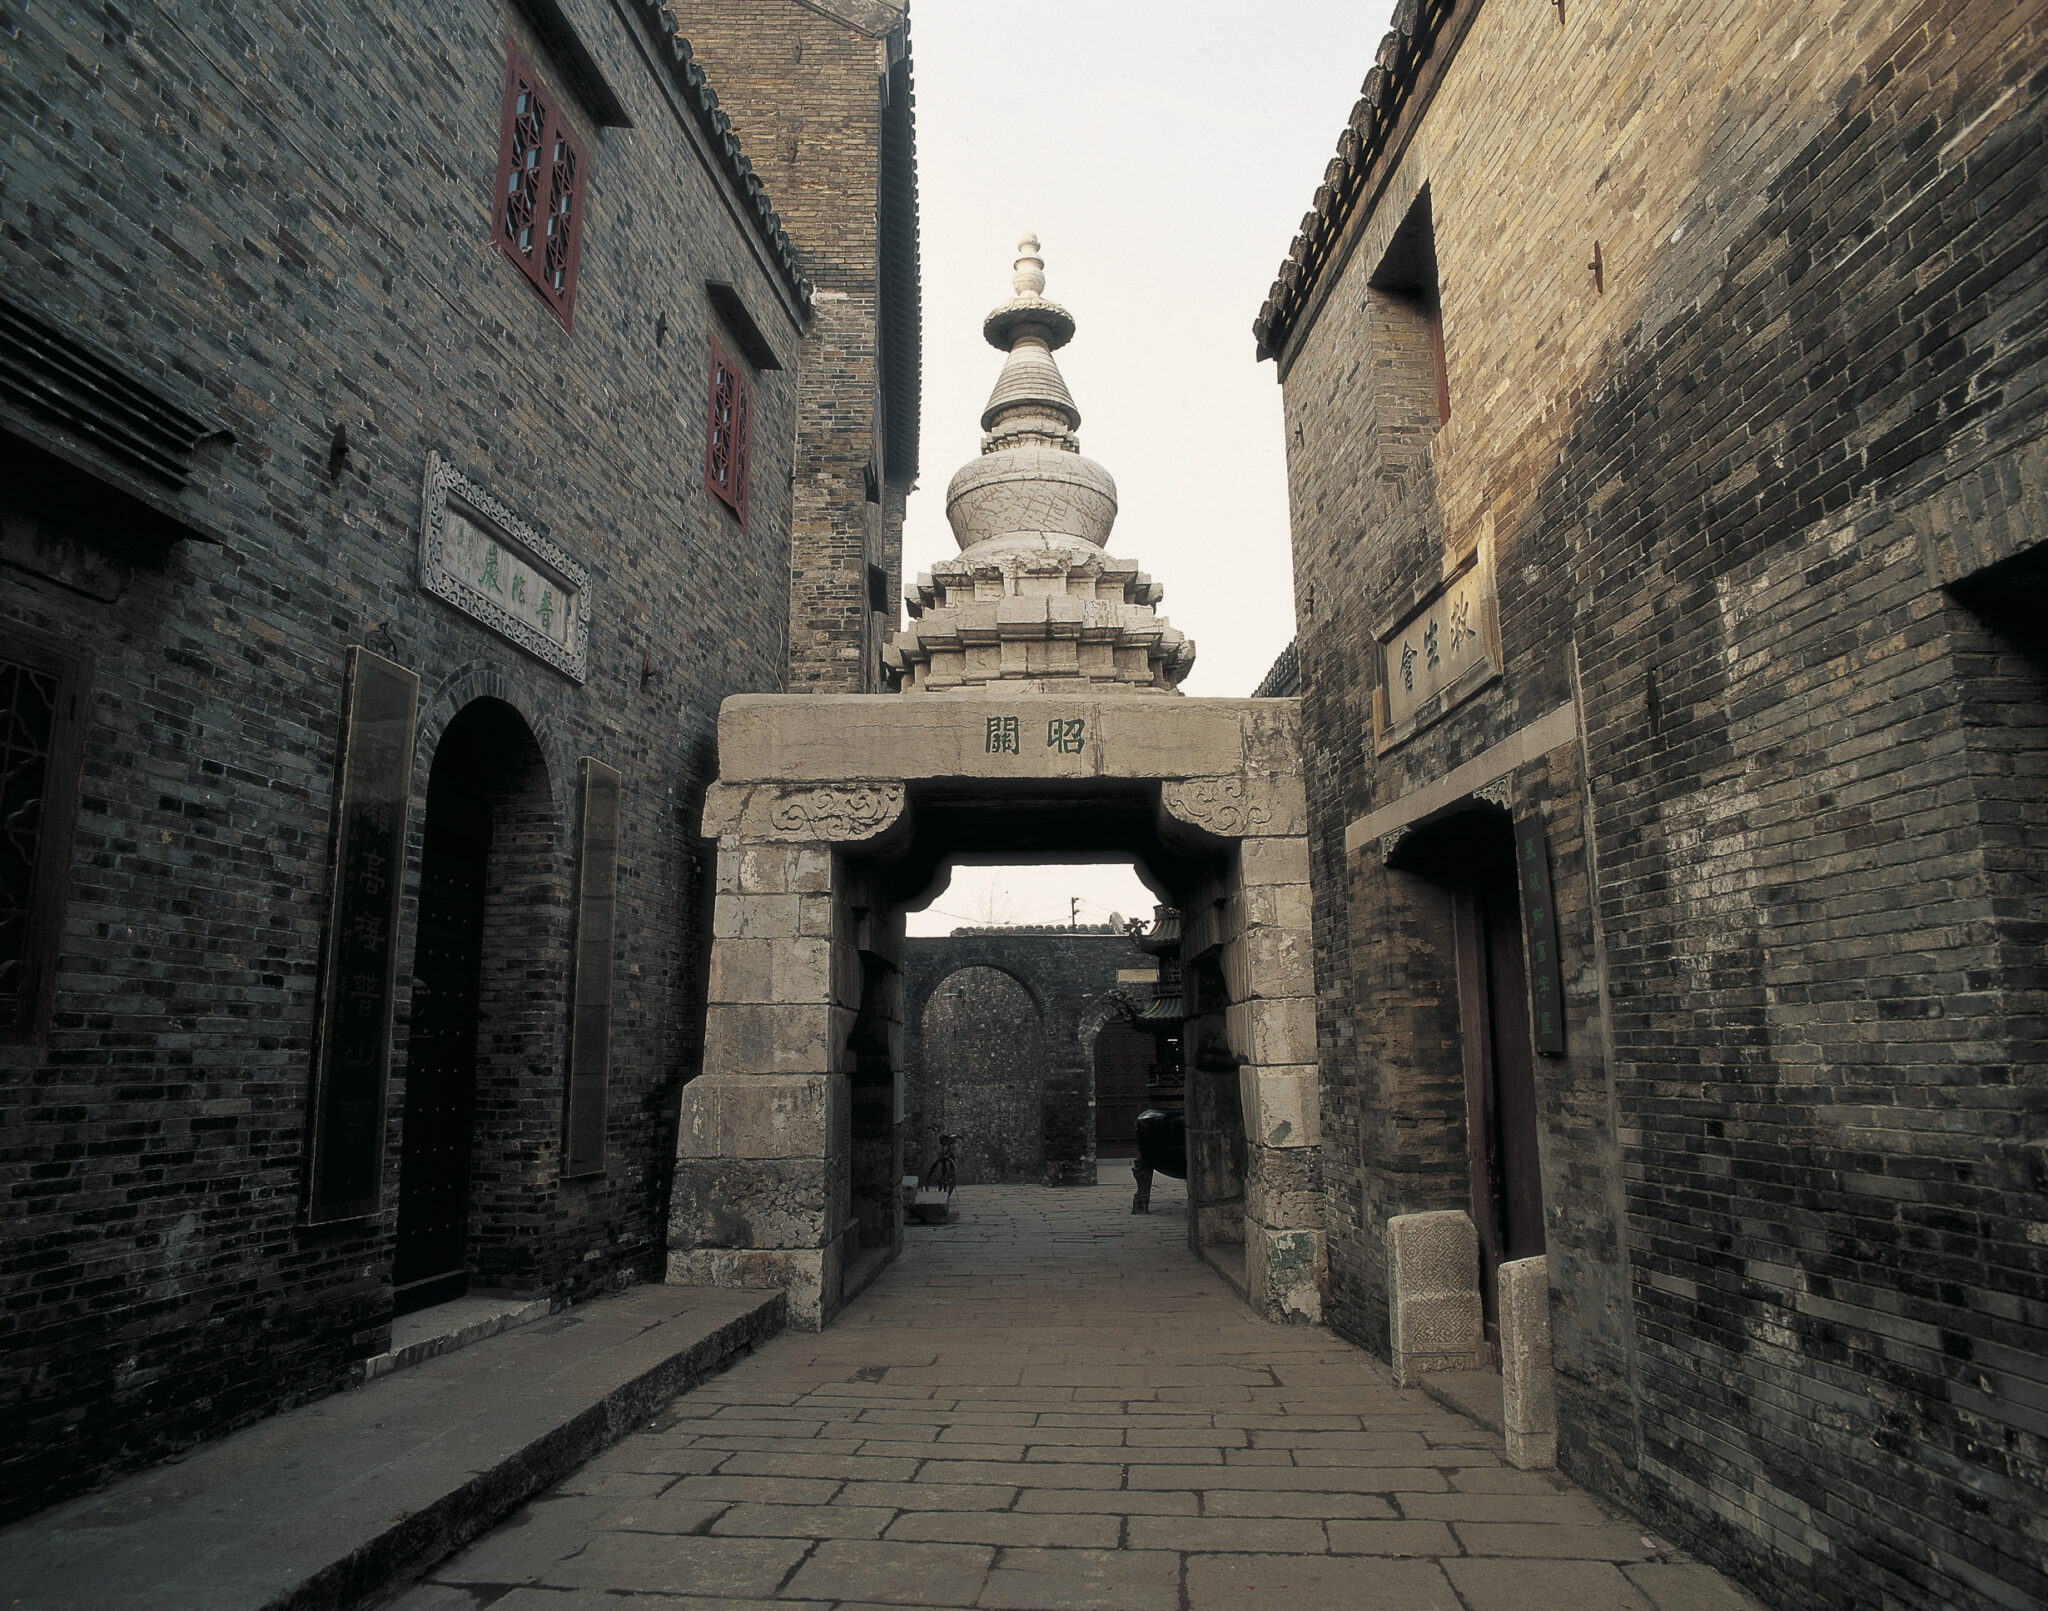 Stone gateway topped with white stupa; situated between grey-brick buildings at end of narrow street